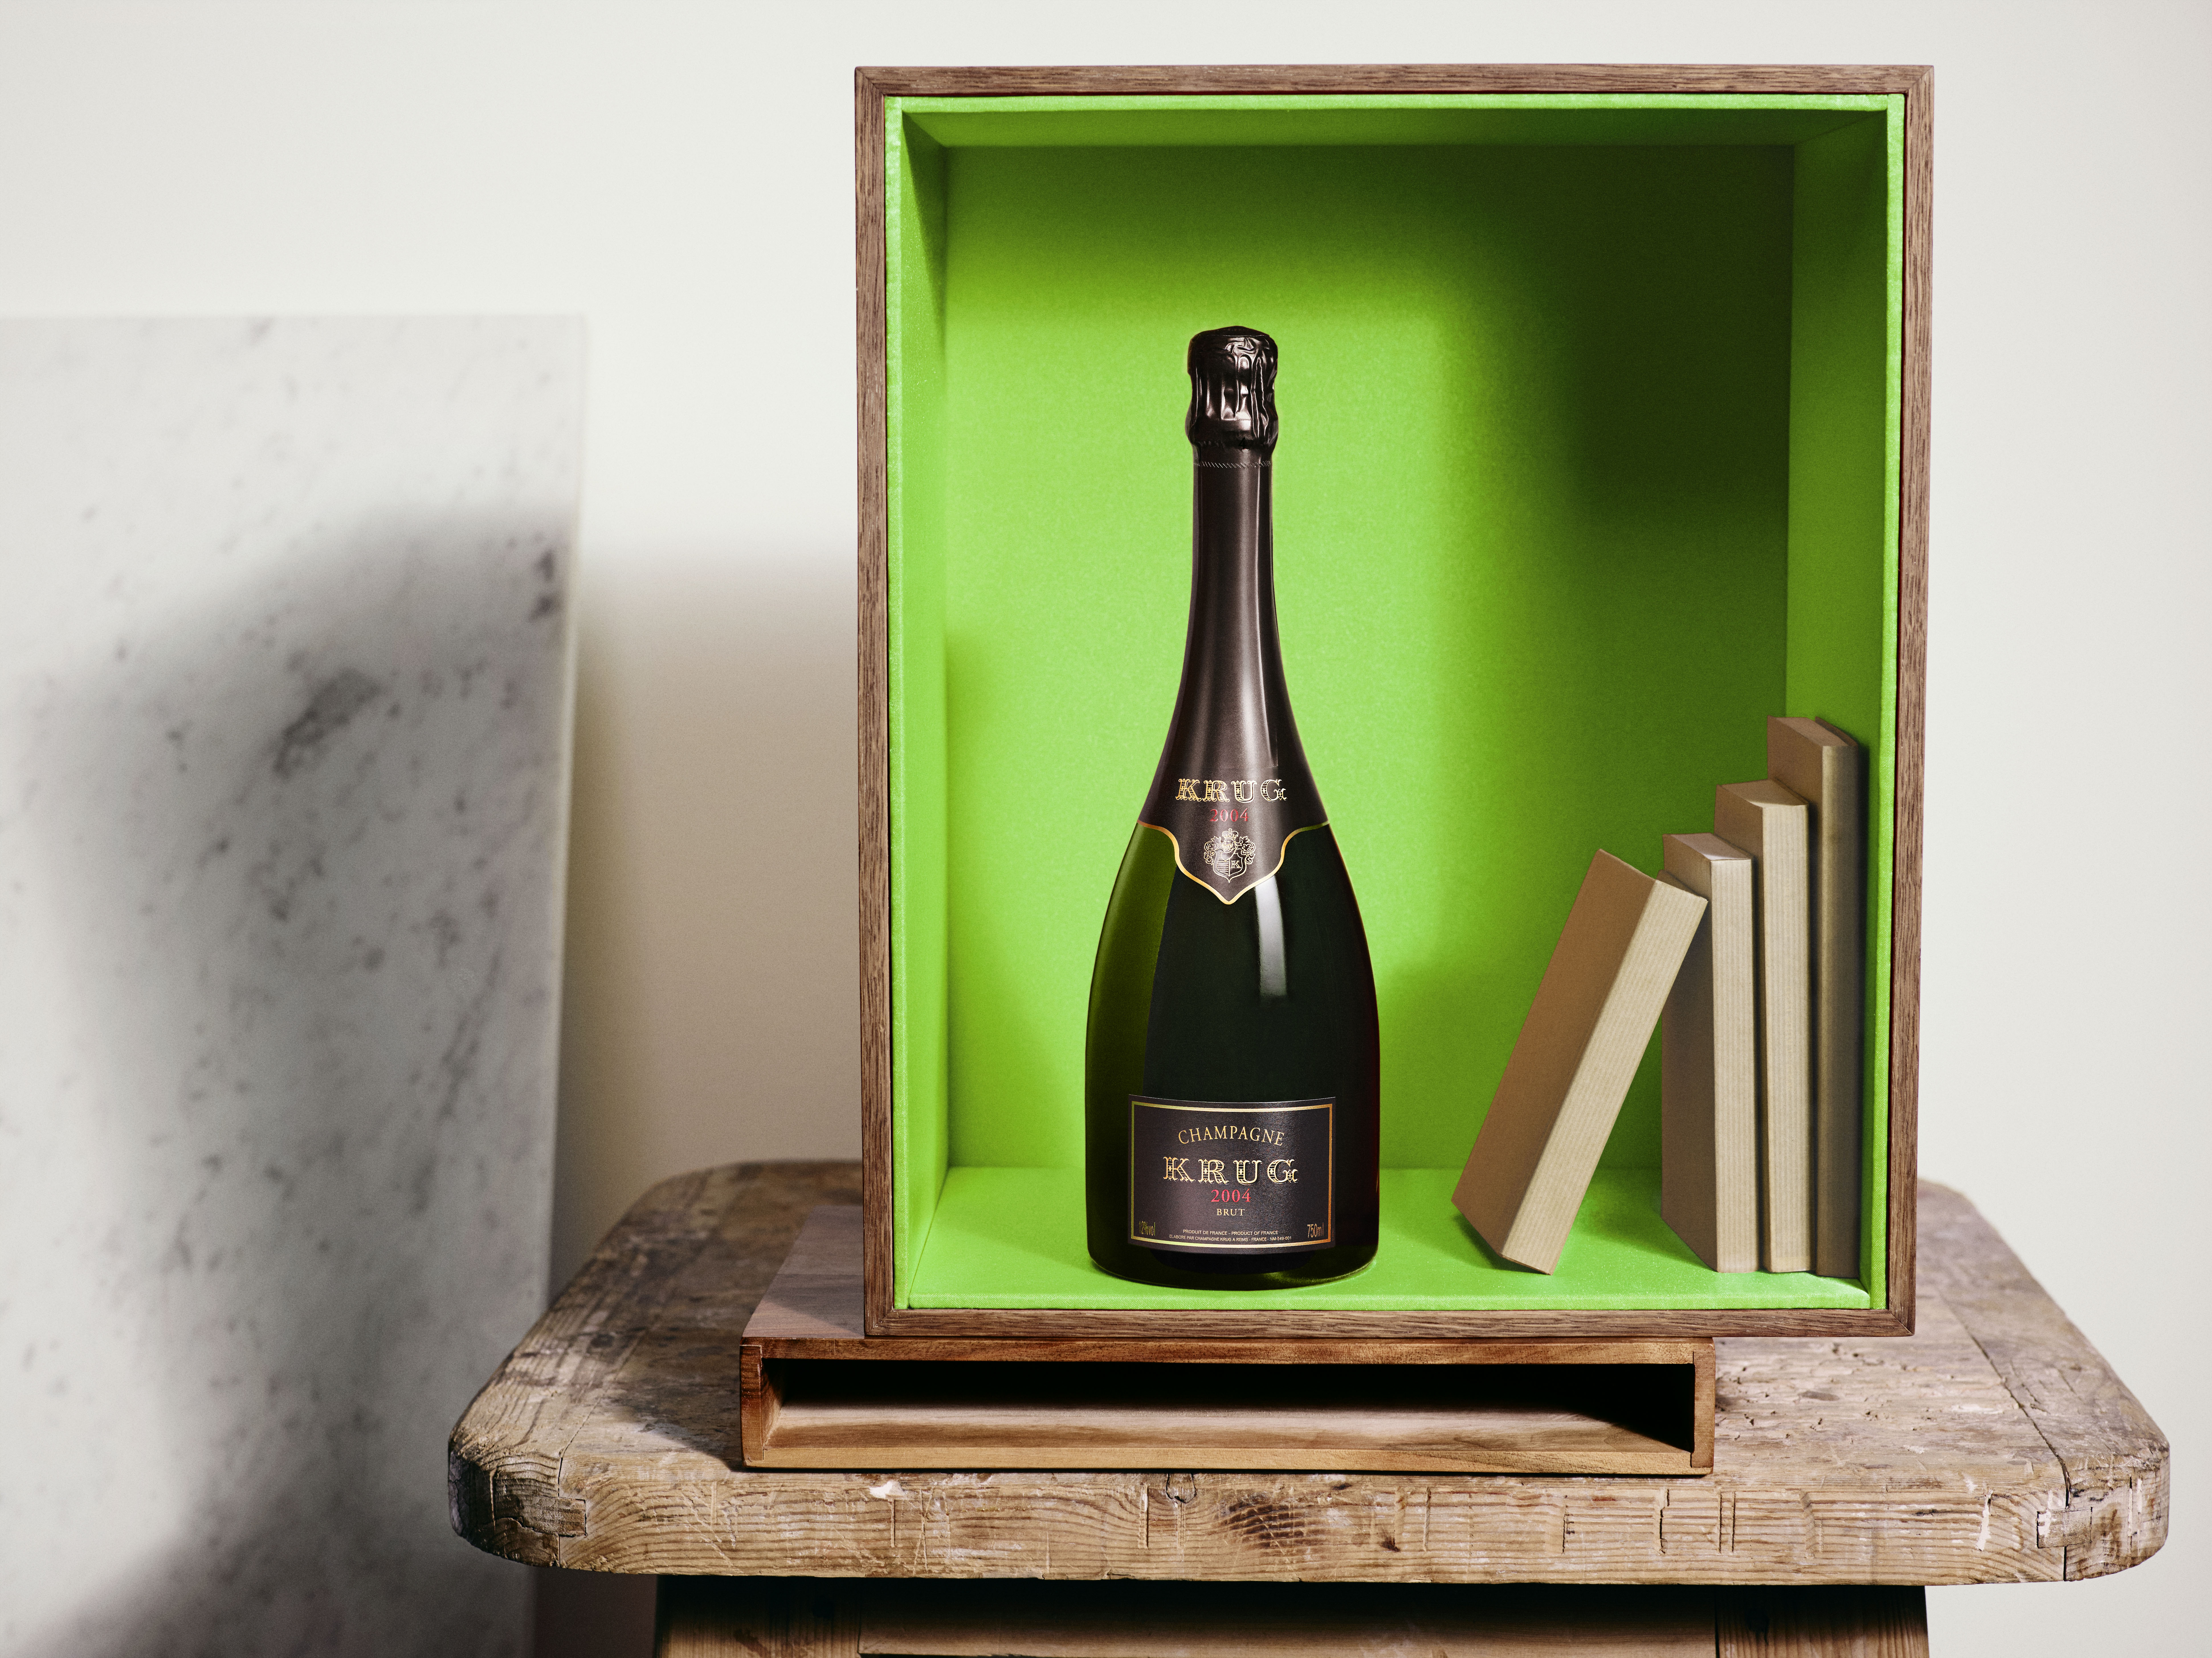 a bottle of champagne in a box